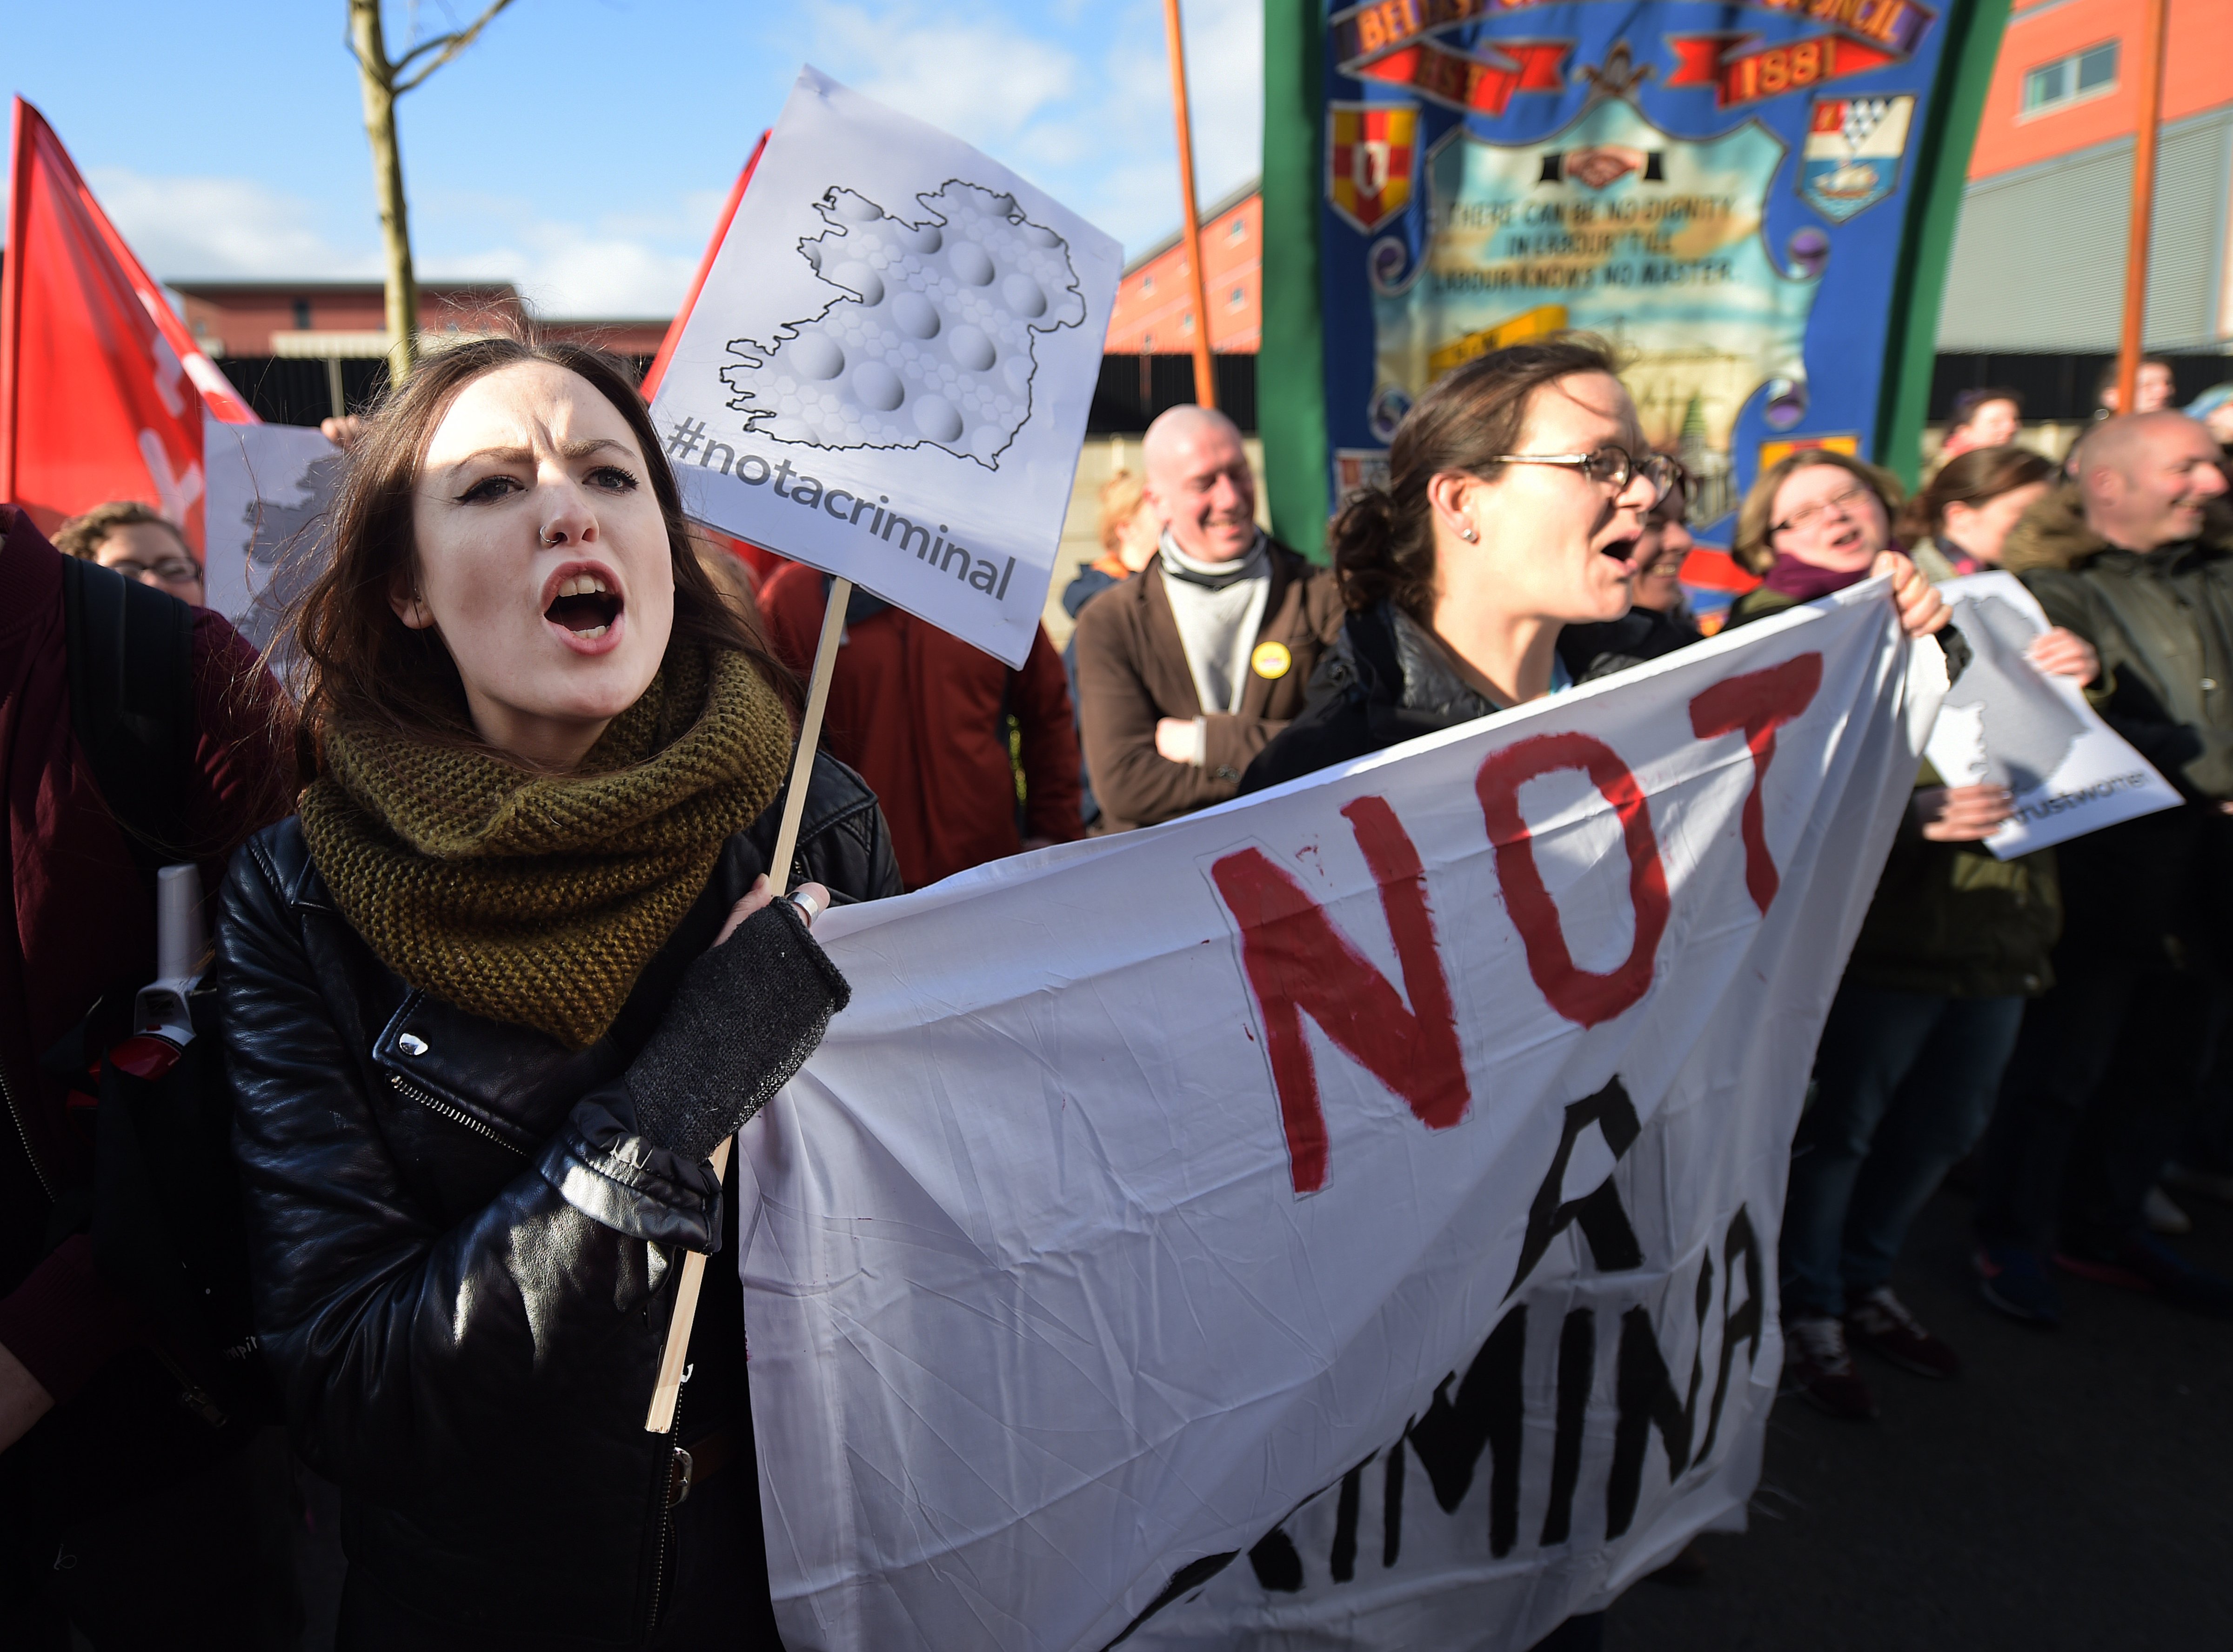 Supporters Protest Over Suspended Sentence For Abortion Ruling